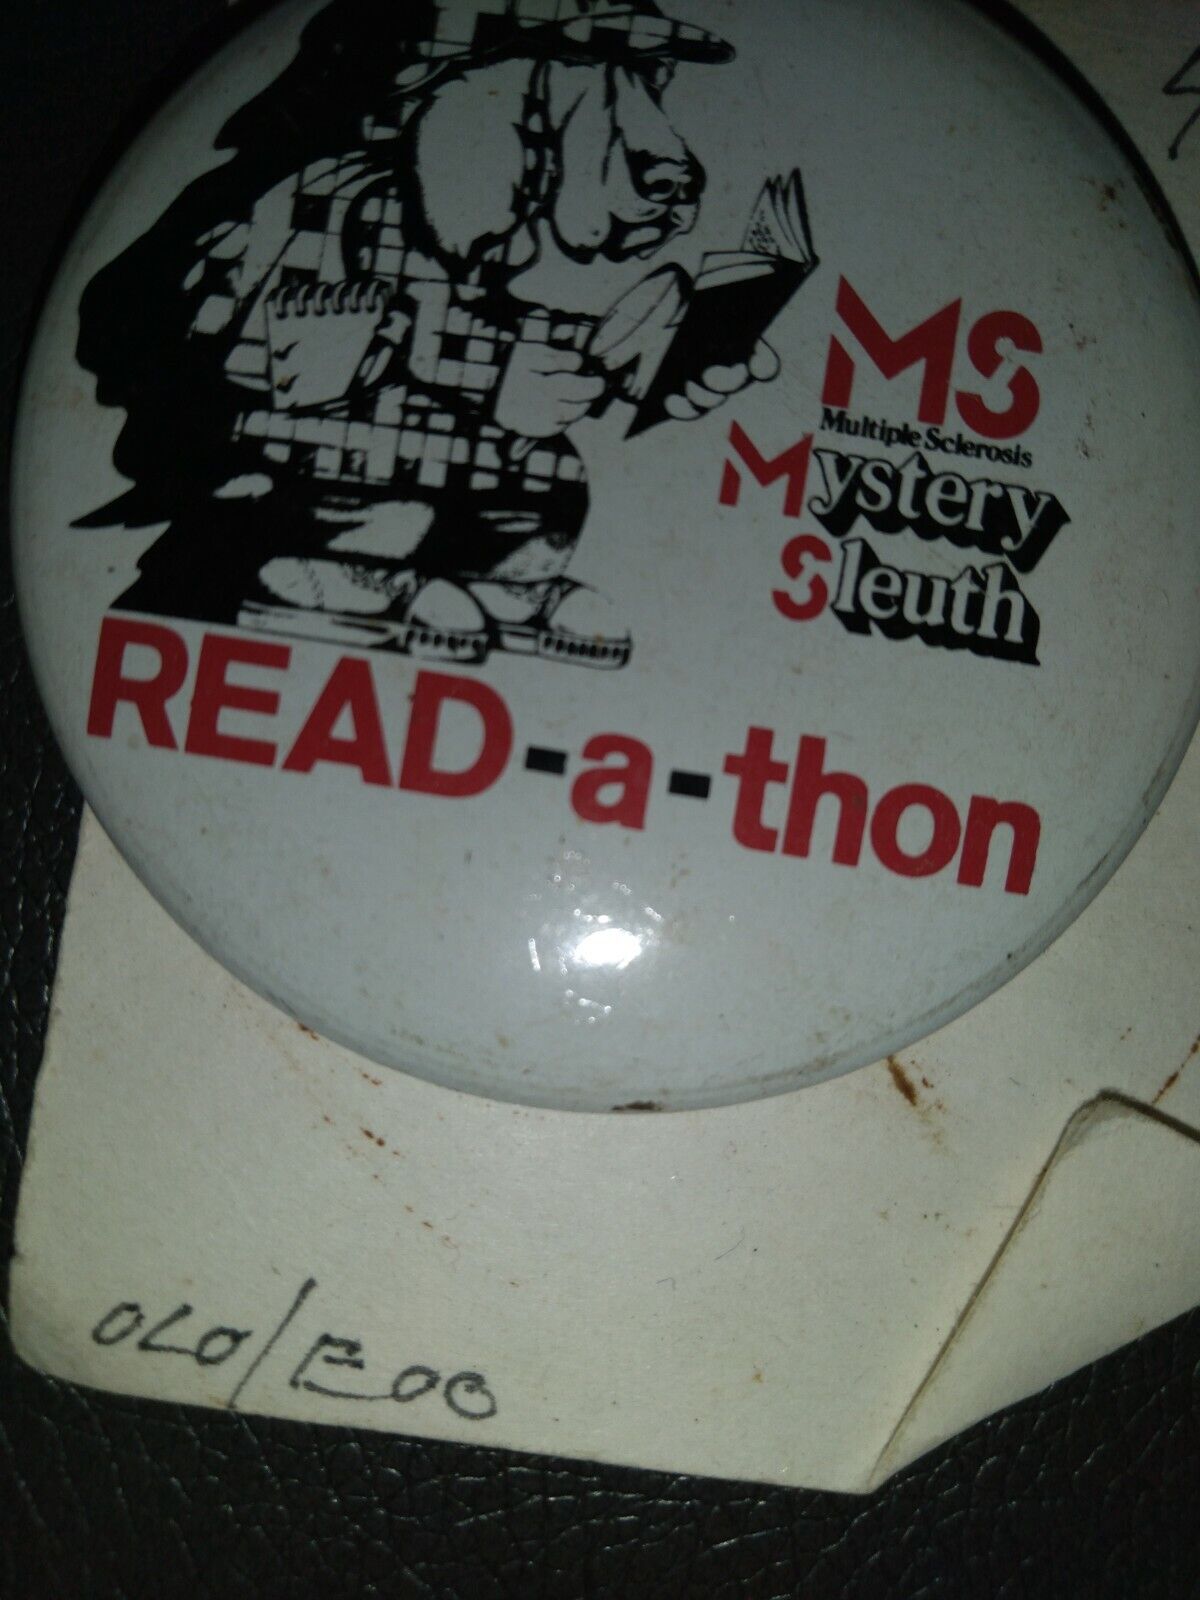 read-a-thon for MS mystery sleuth multiple sclerosis Pinback Button Pin,☆ bin322